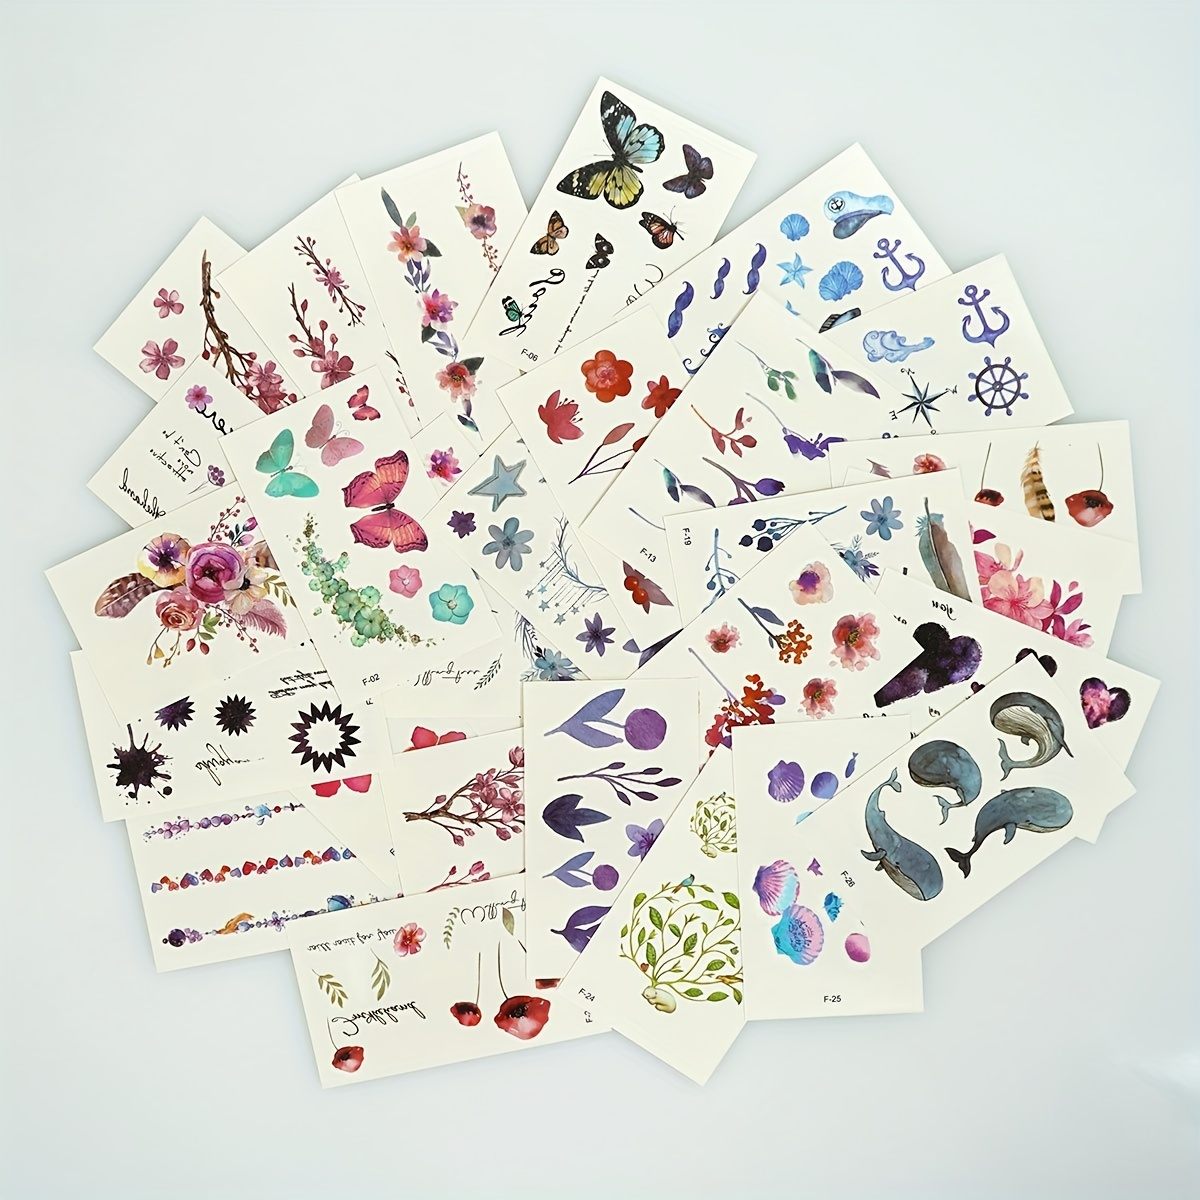 

30 Sheets Waterproof Tattoo Stickers, Long Lasting Temporary Tattoos, Colorful Rendering Animal And Flower Pattern, Face Arm Back Leg Stickers Body Art